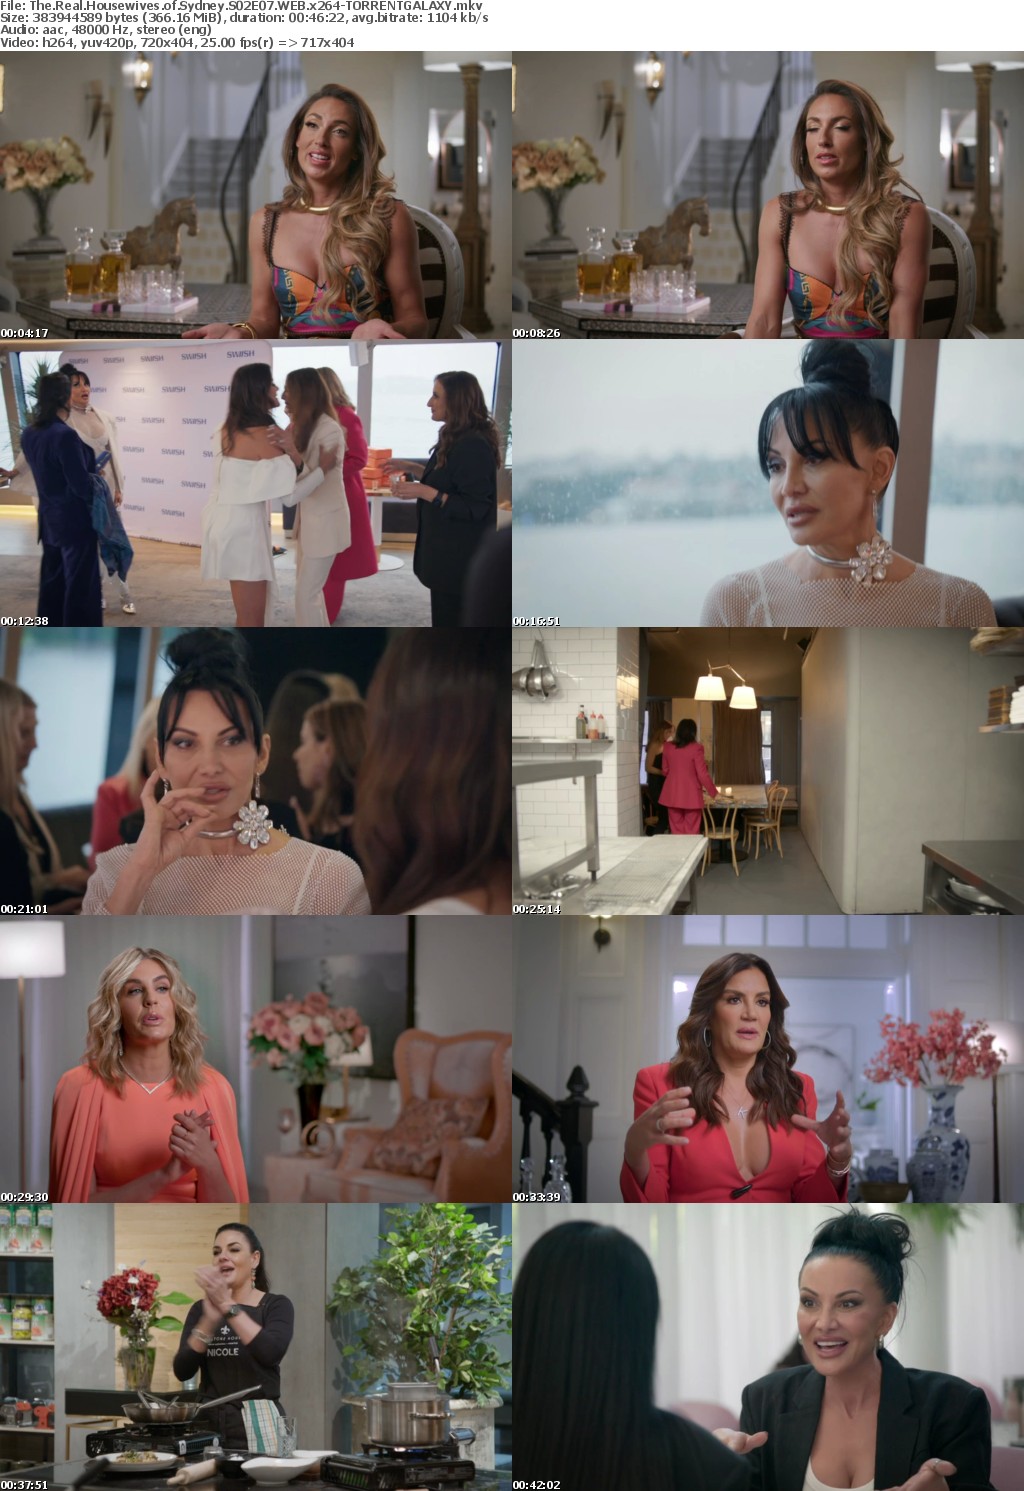 The Real Housewives of Sydney S02E07 WEB x264-GALAXY